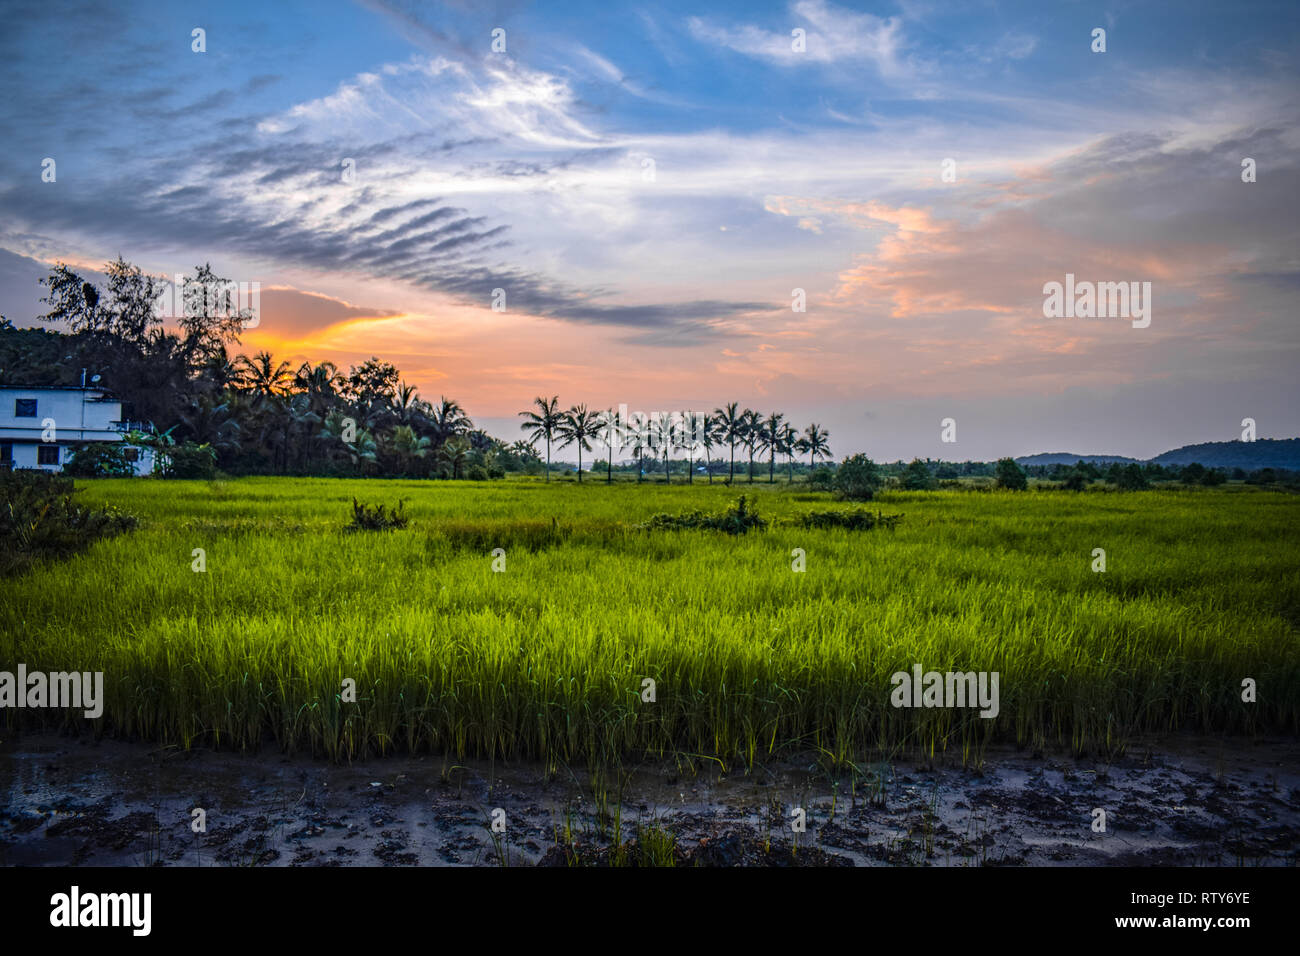 A beautiful field clicked in India using a Nikon with NIKKOR 18-55mm lens Stock Photo - Alamy